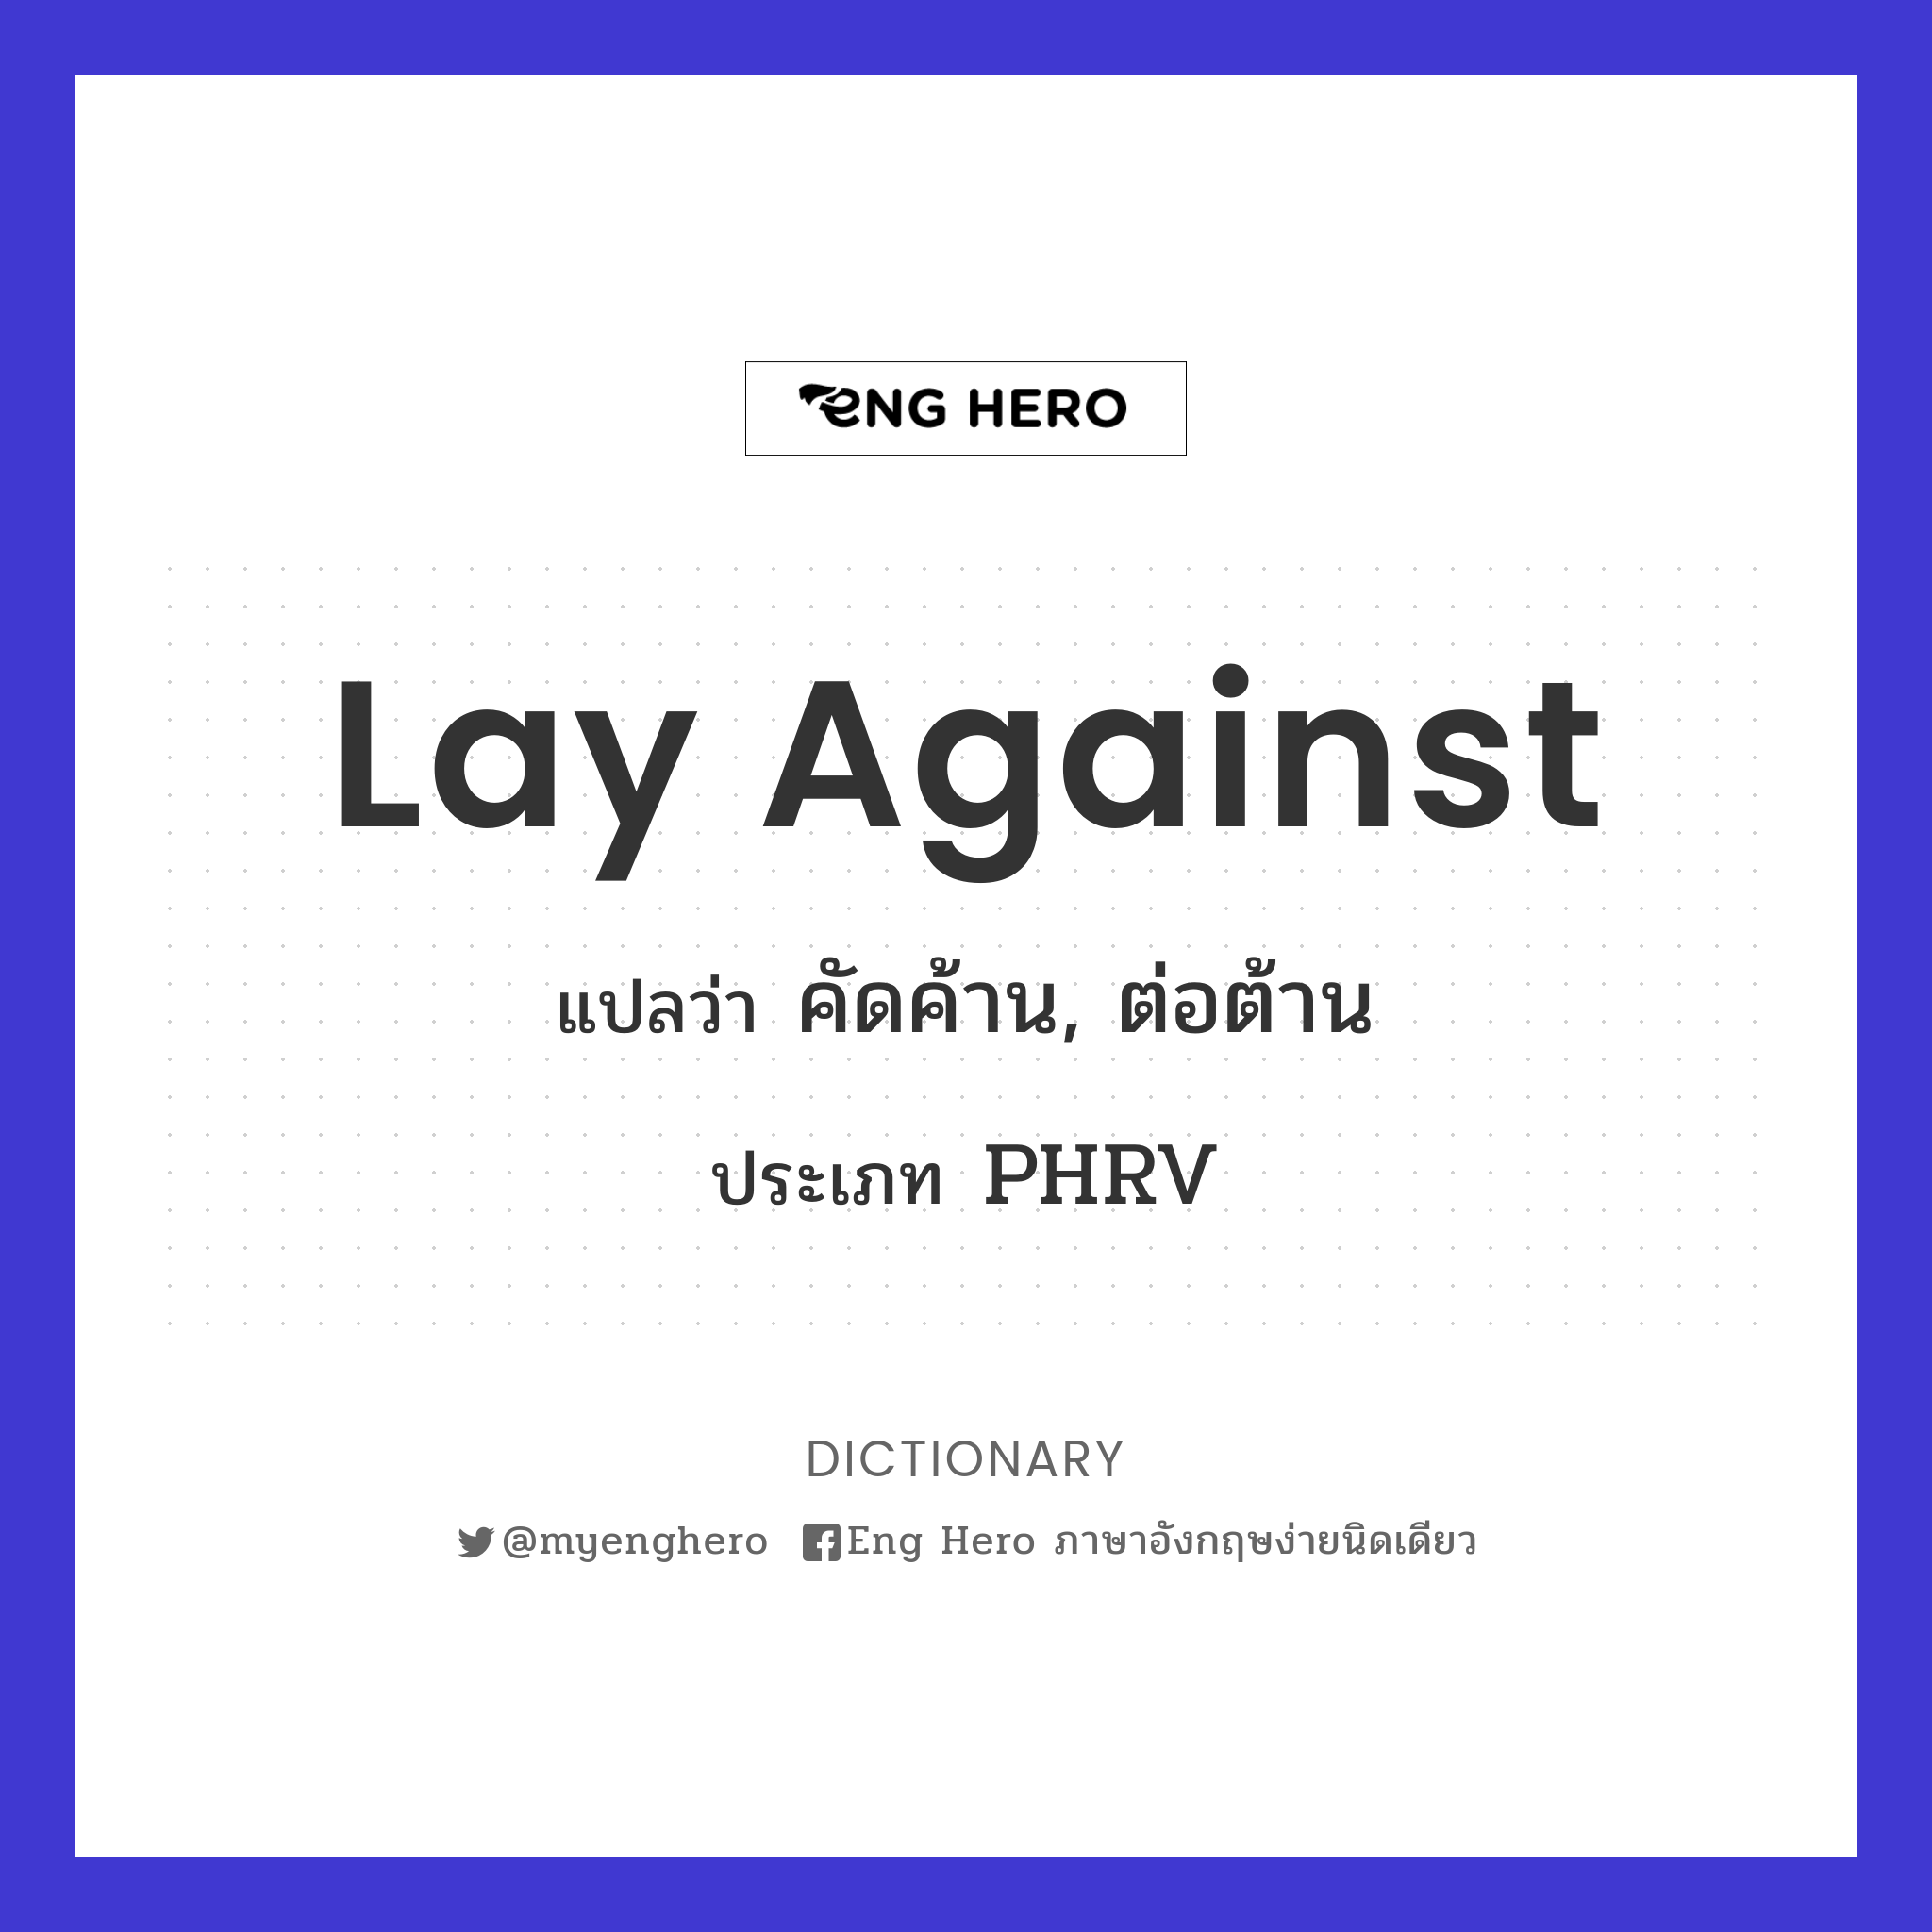 lay against